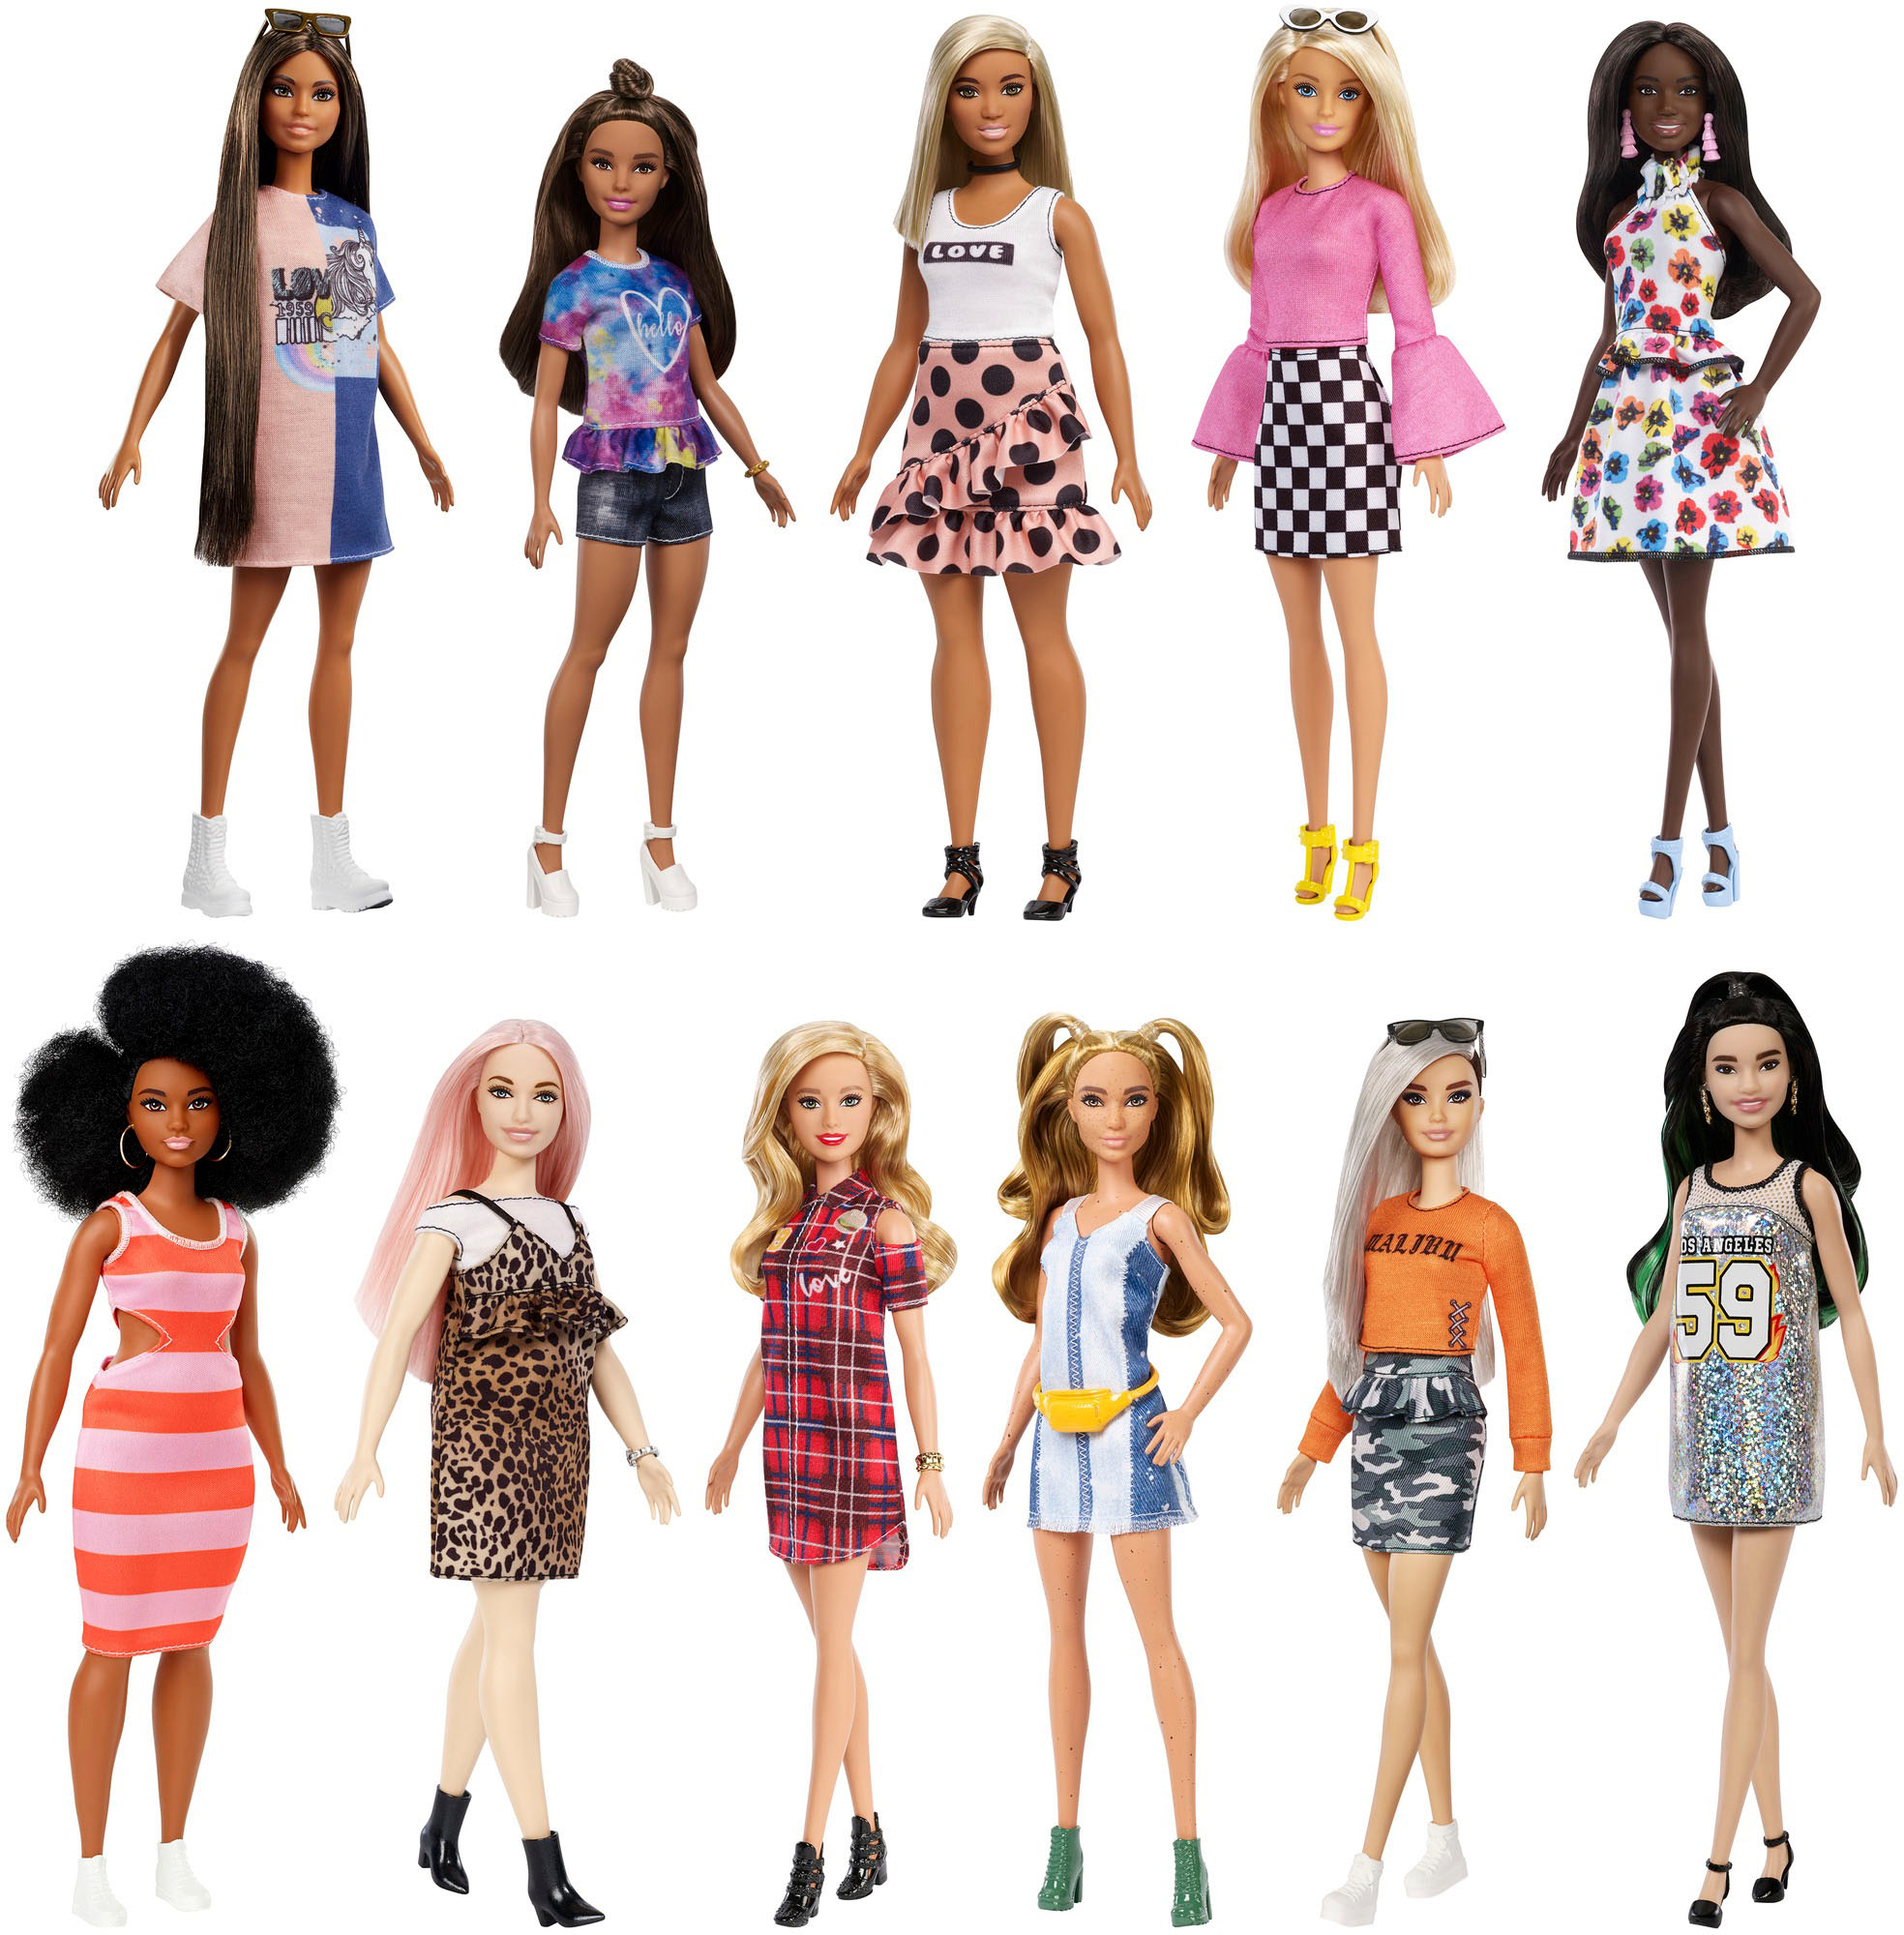 Brand New Barbie Complete Looks Mattel Choose the outfit you would like 